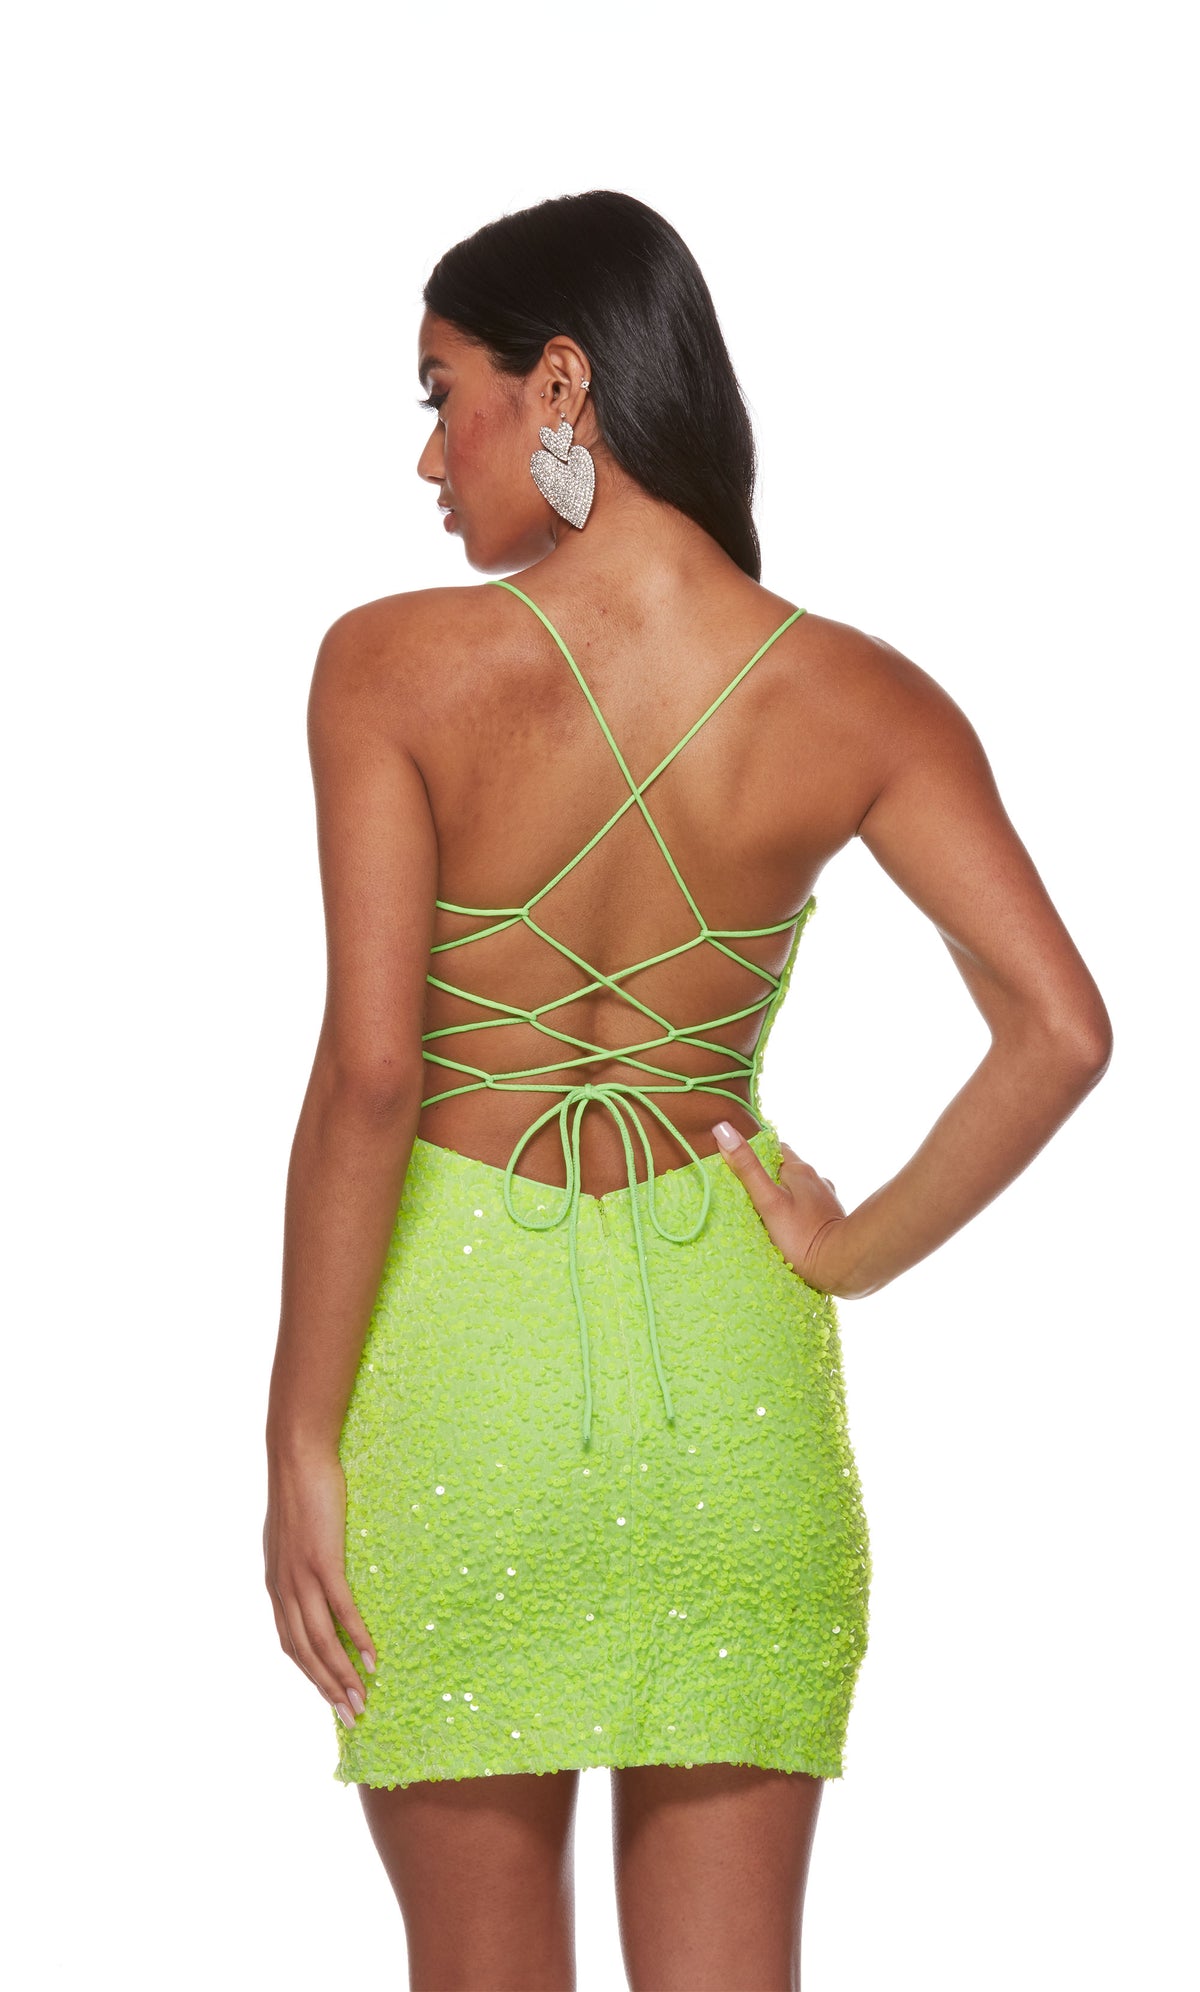 An iridescent, neon green sequin mini dress with a strappy back.